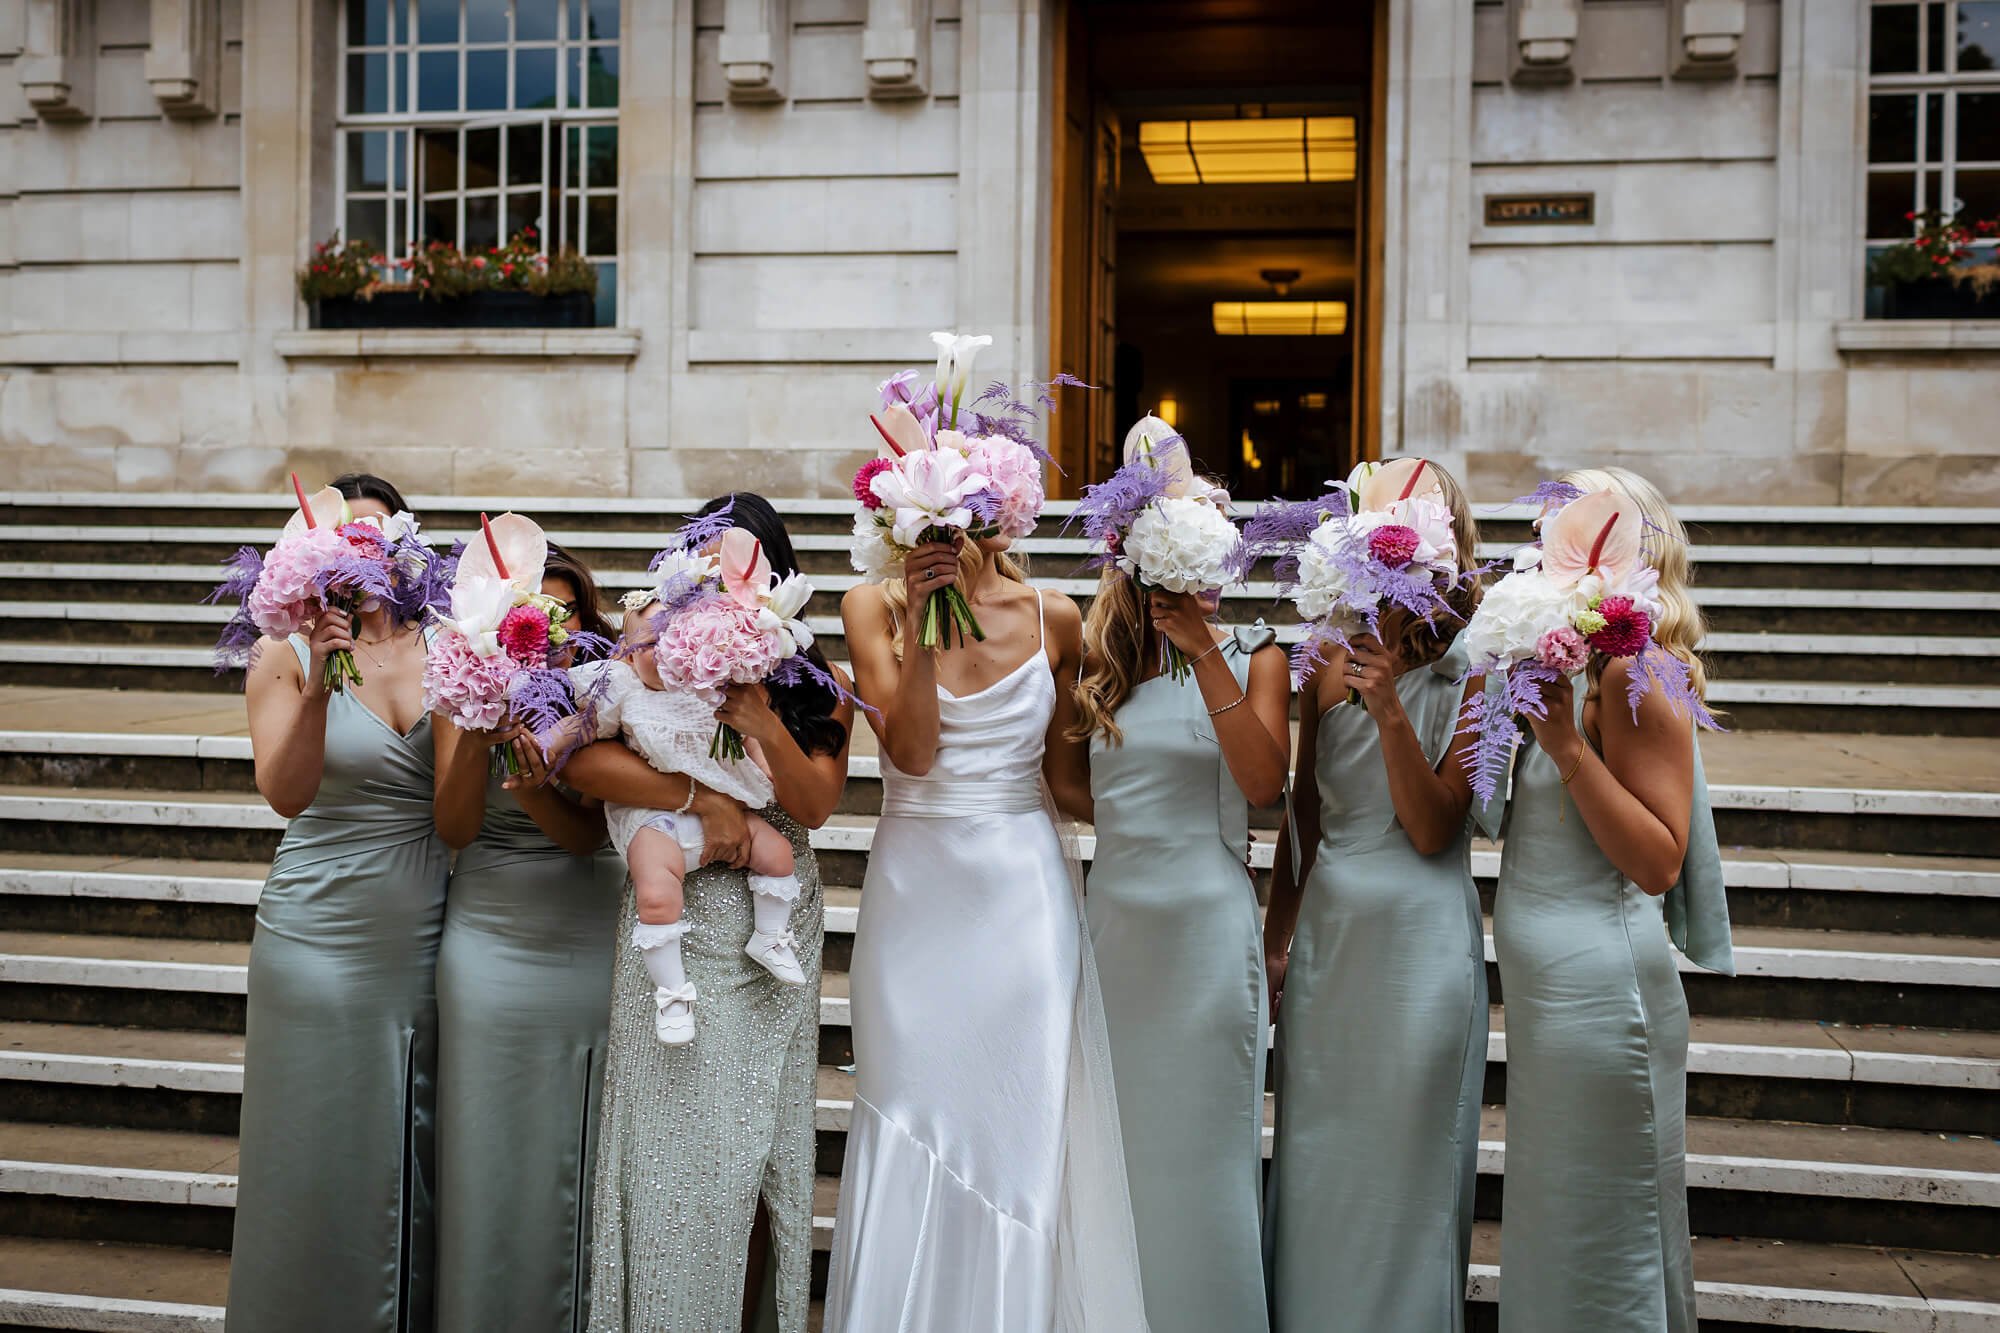 Bride and bridesmaids with their flowers in front of their faces